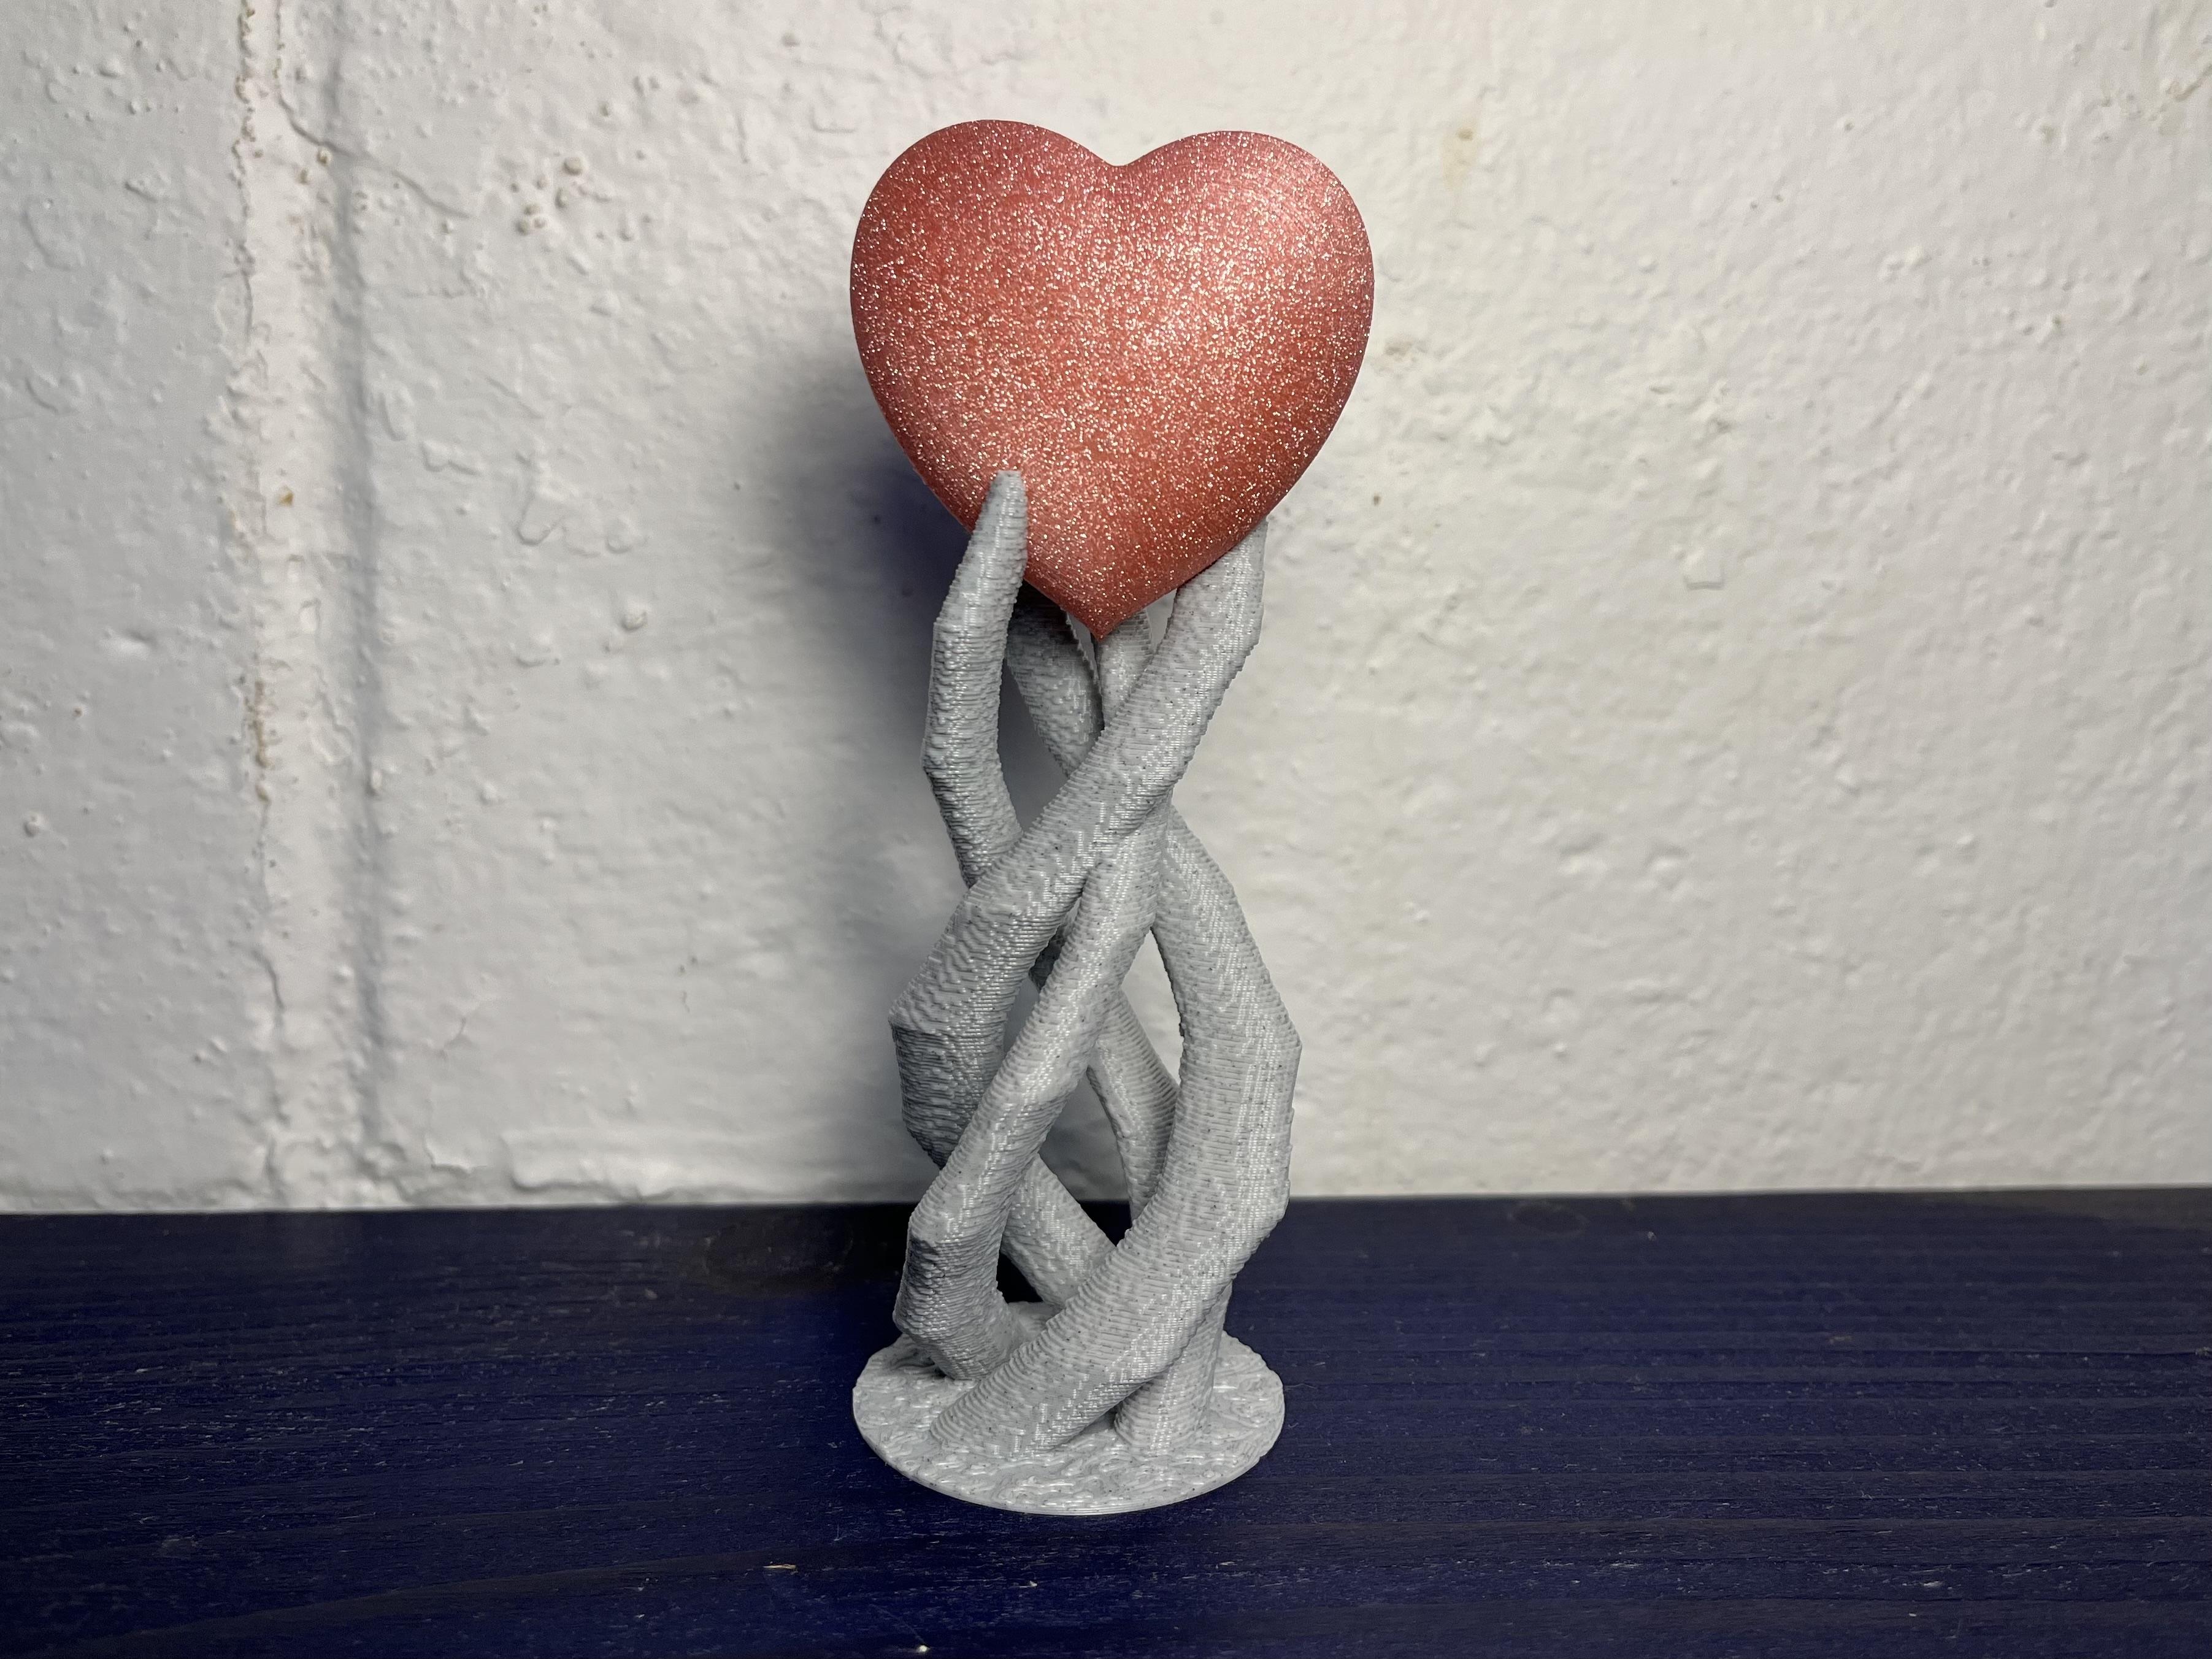 Valentine Heart Ornament - Alien3D Particle Pink PLA Heart with Polyalchemy Granite FX PLA base. Base at 0.25mm Draft settings in PrusaSlicer on Prusa Mini. Heart printed with variable layer height going from 0.25mm at the back to 0.05mm at the front. Printed laying down with supports because this filament really shines while looking down onto the layers. It also hides the layer lines so well that I probably didn't even need to go so detailed, but it took the same amount of time as a constant 0.1mm layer height part that was printed standing up. - 3d model